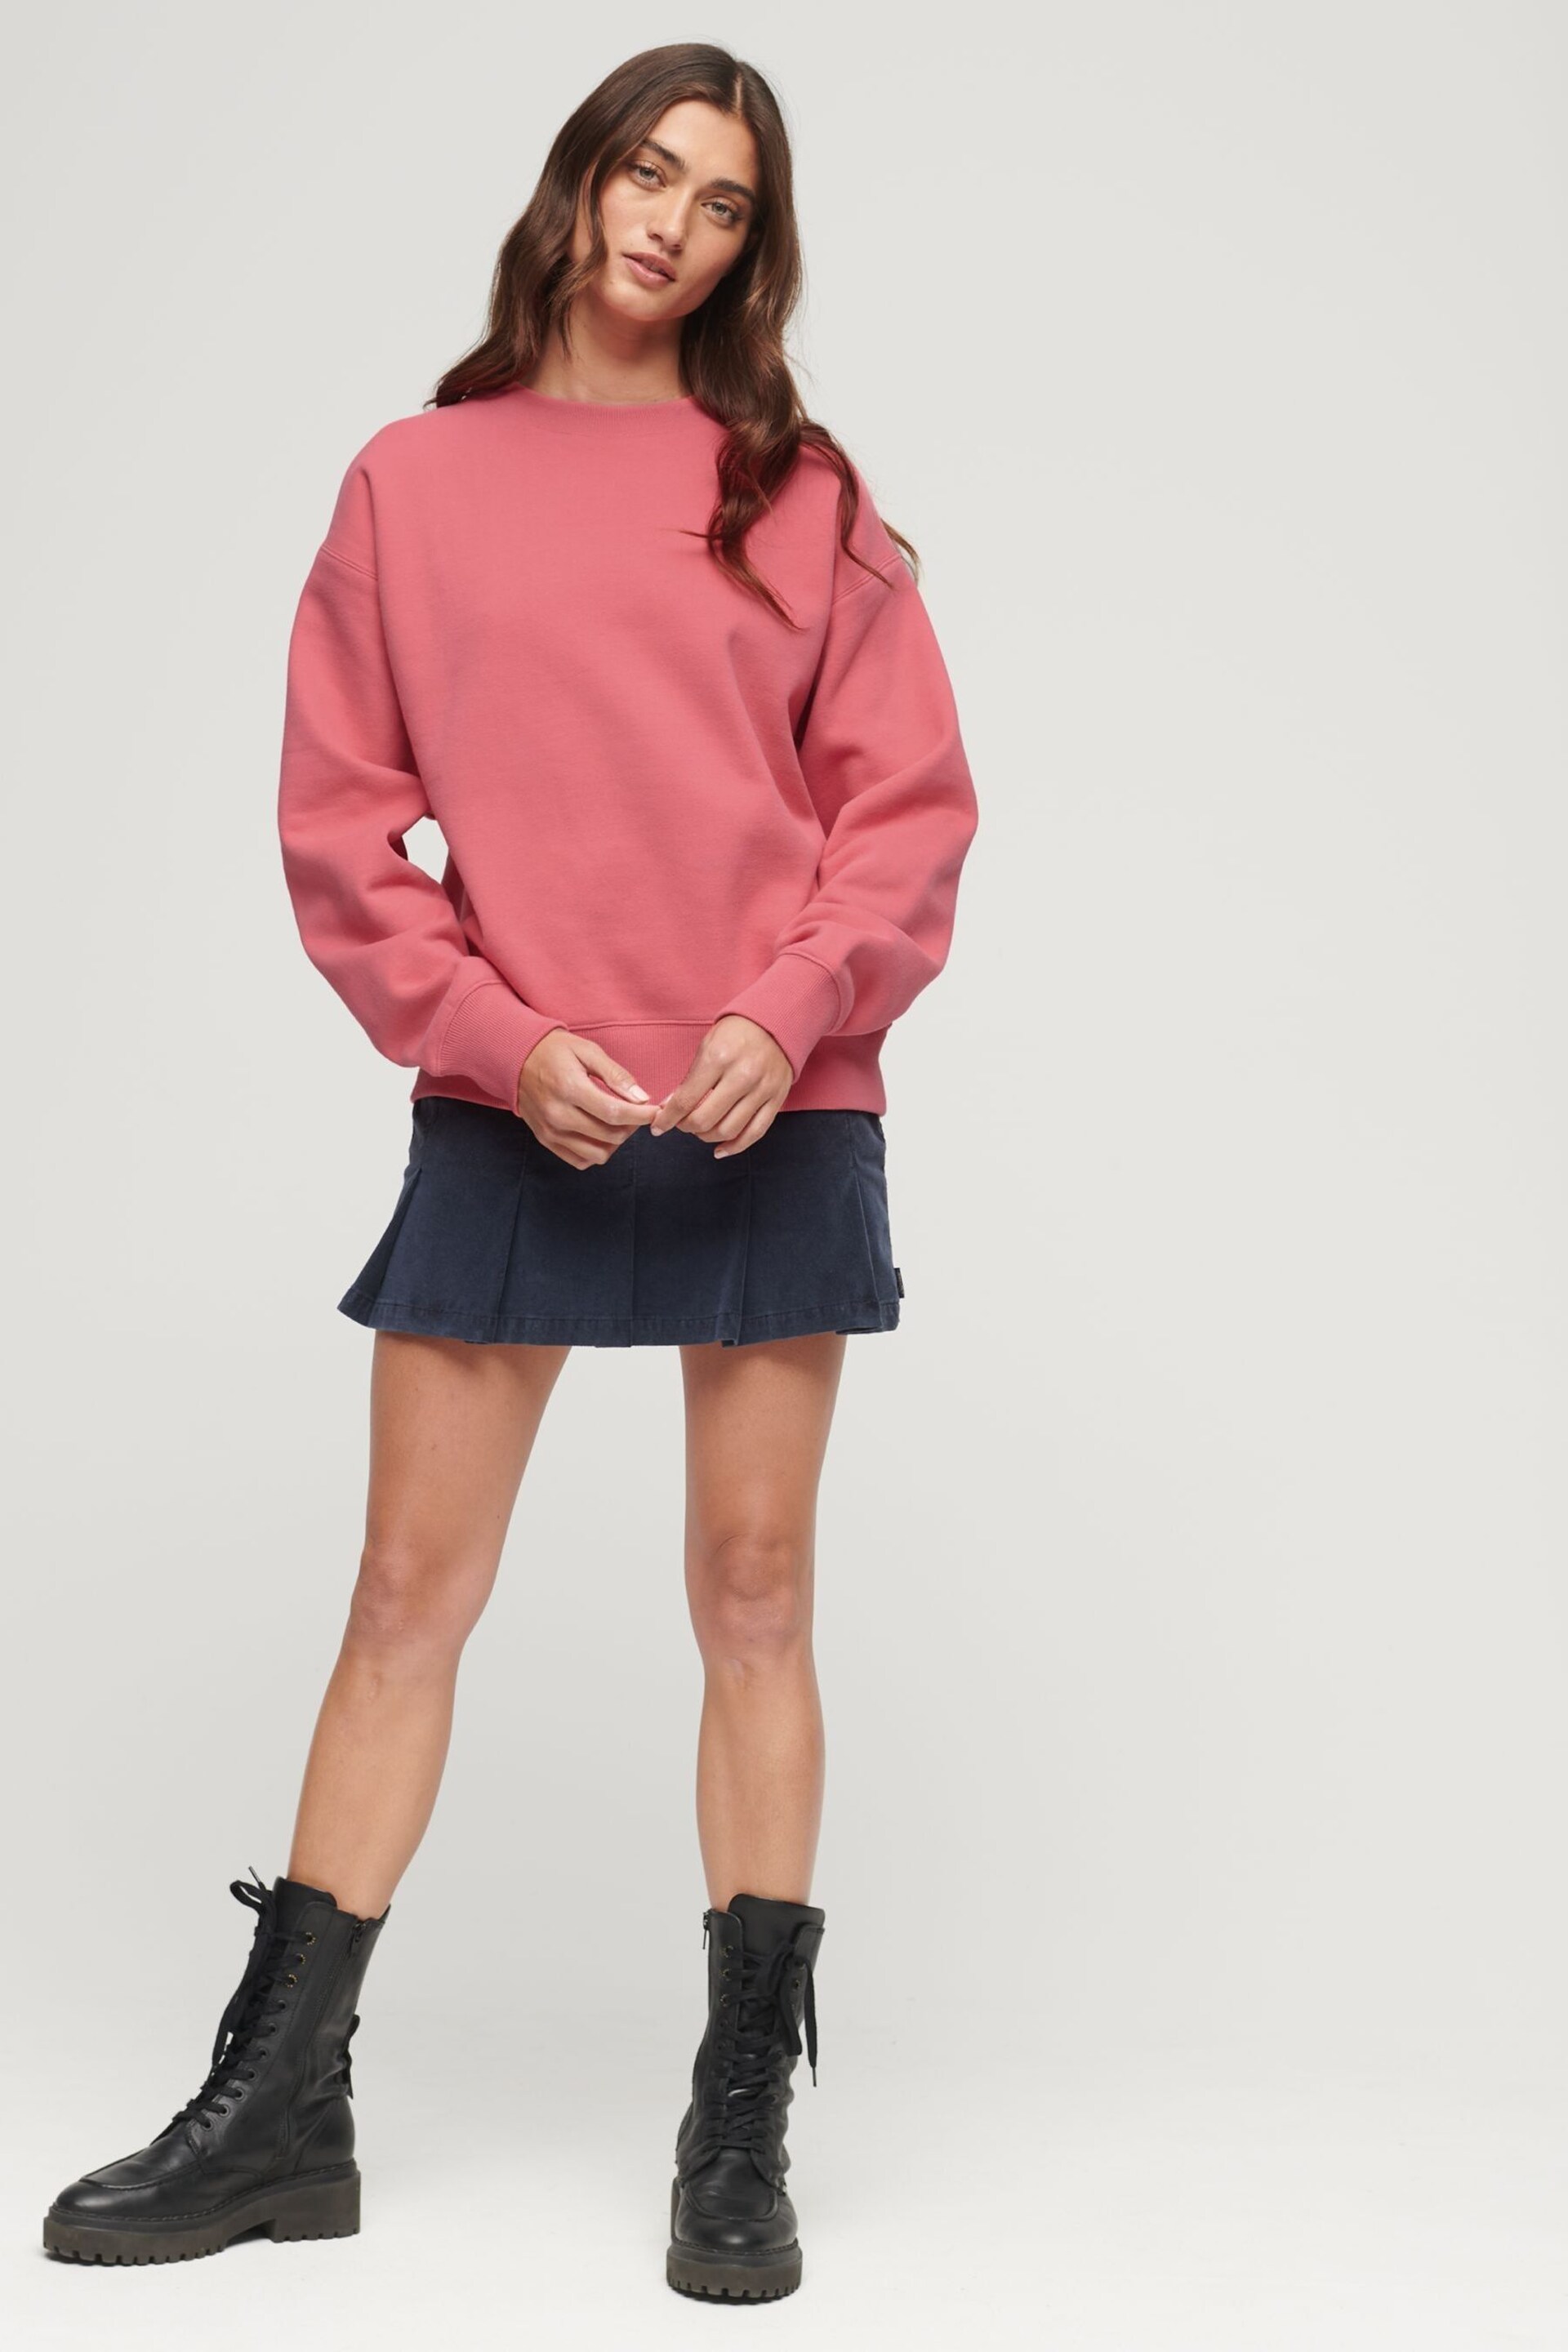 Superdry Pink Essential Logo Relaxed Fit Sweatshirt - Image 2 of 6